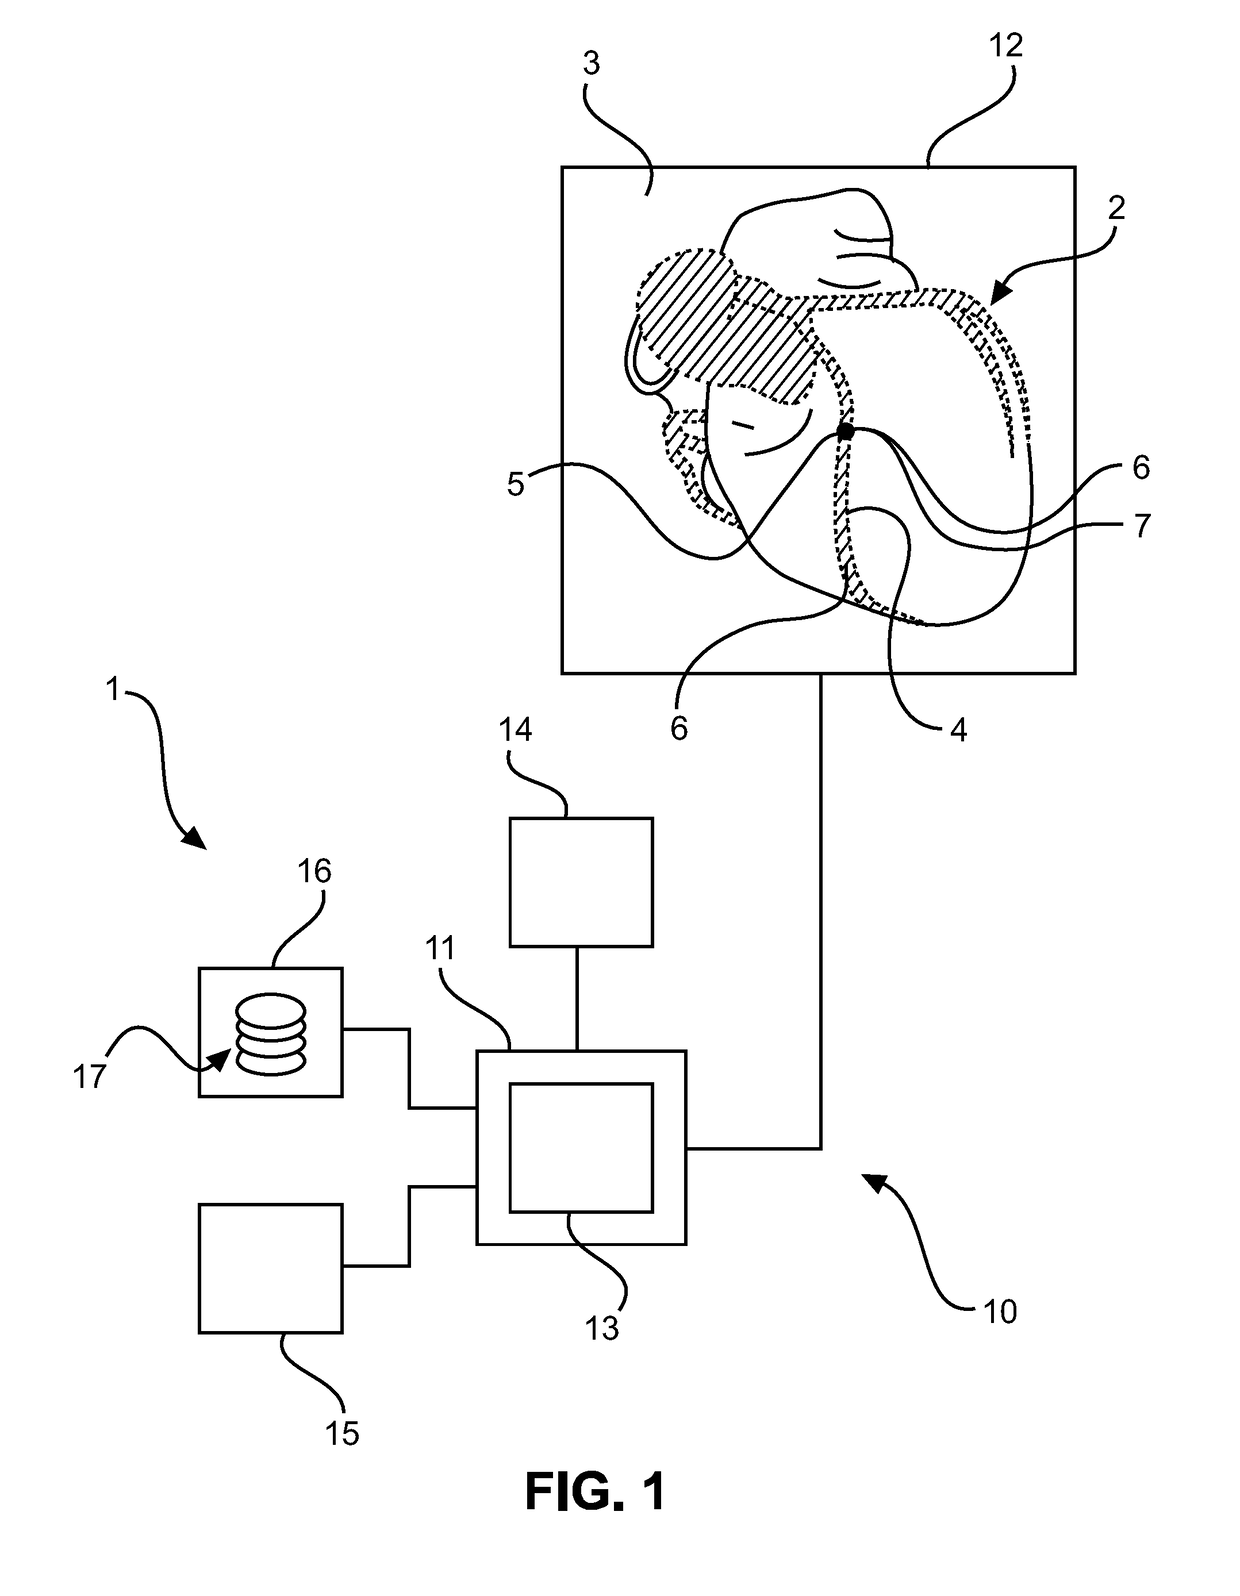 Segmentation apparatus for interactively segmenting blood vessels in angiographic image data